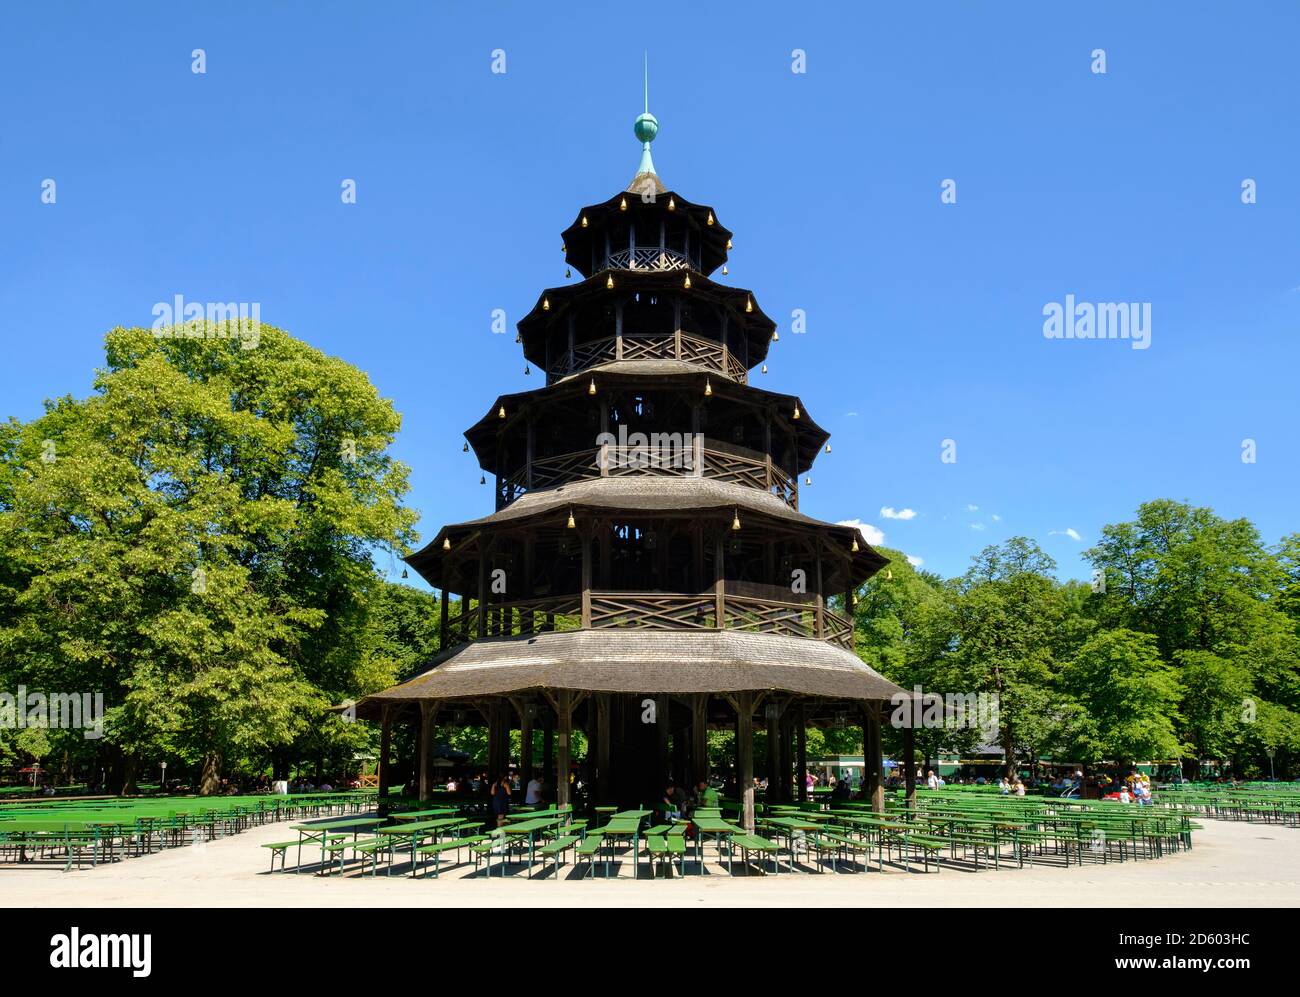 Germany, Munich, English Garden, Chinese Tower and beer garden Stock Photo